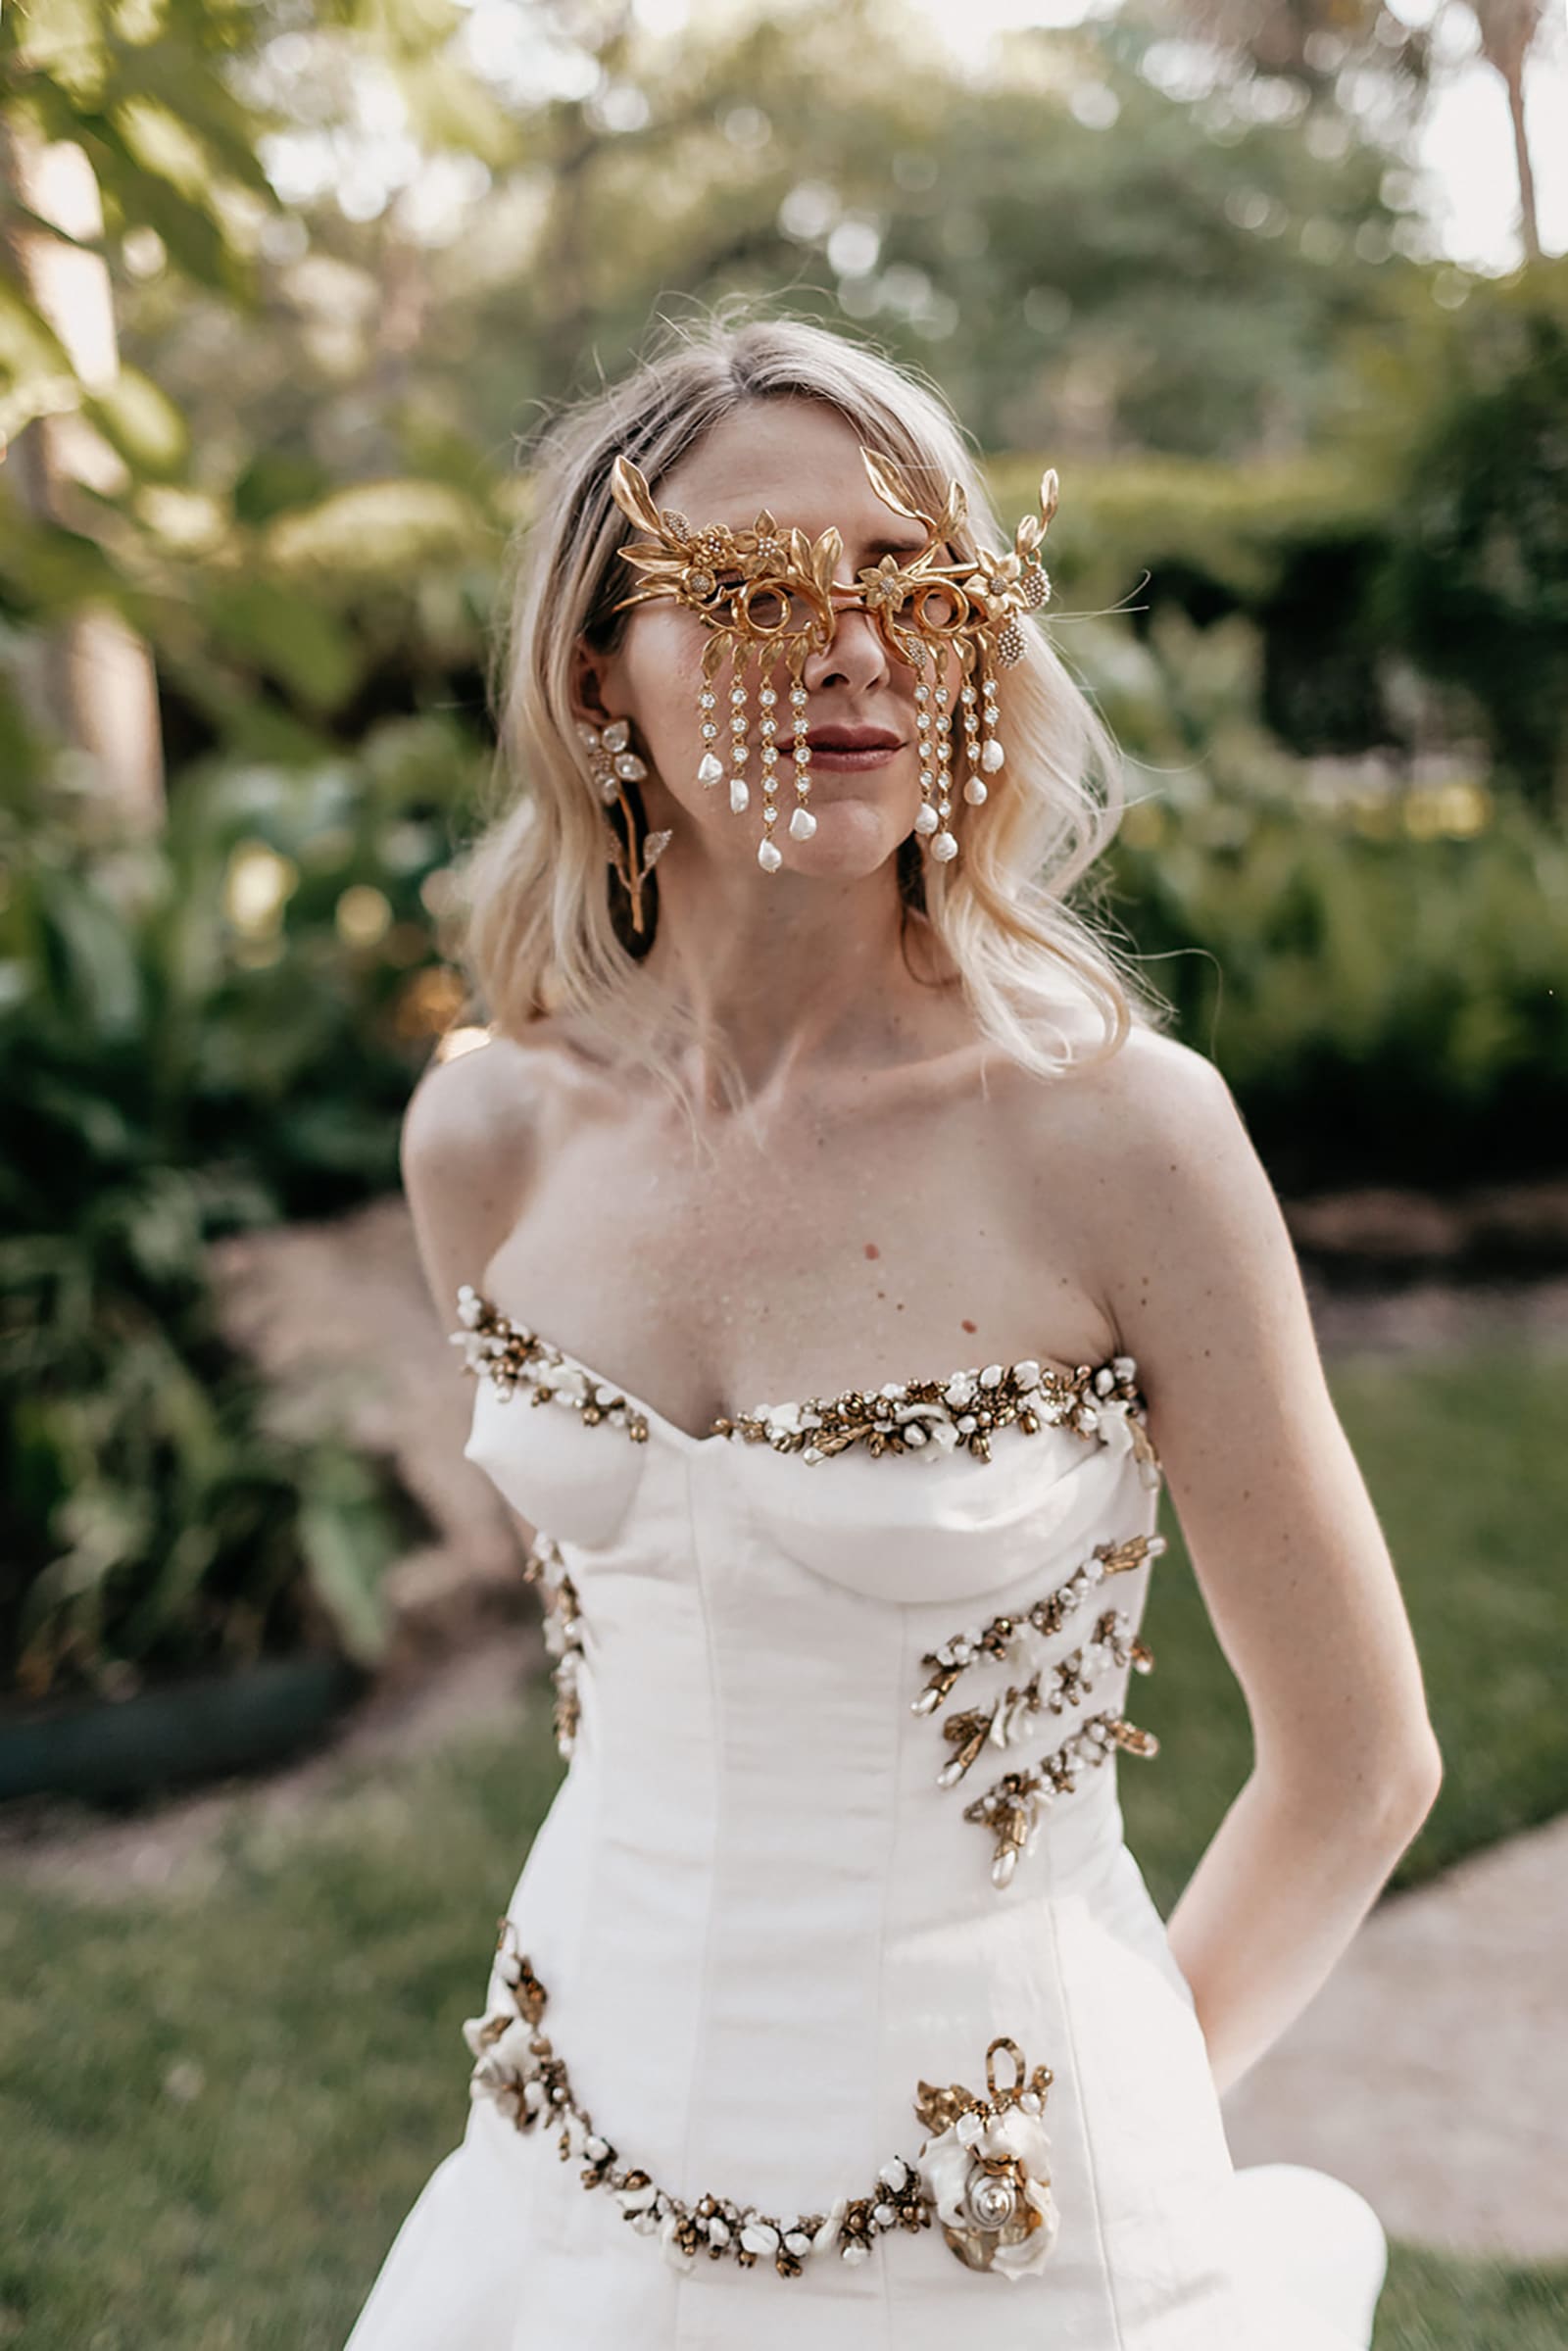 Away from the traditional white dress ... What is the latest wedding fashion trend in 2022?